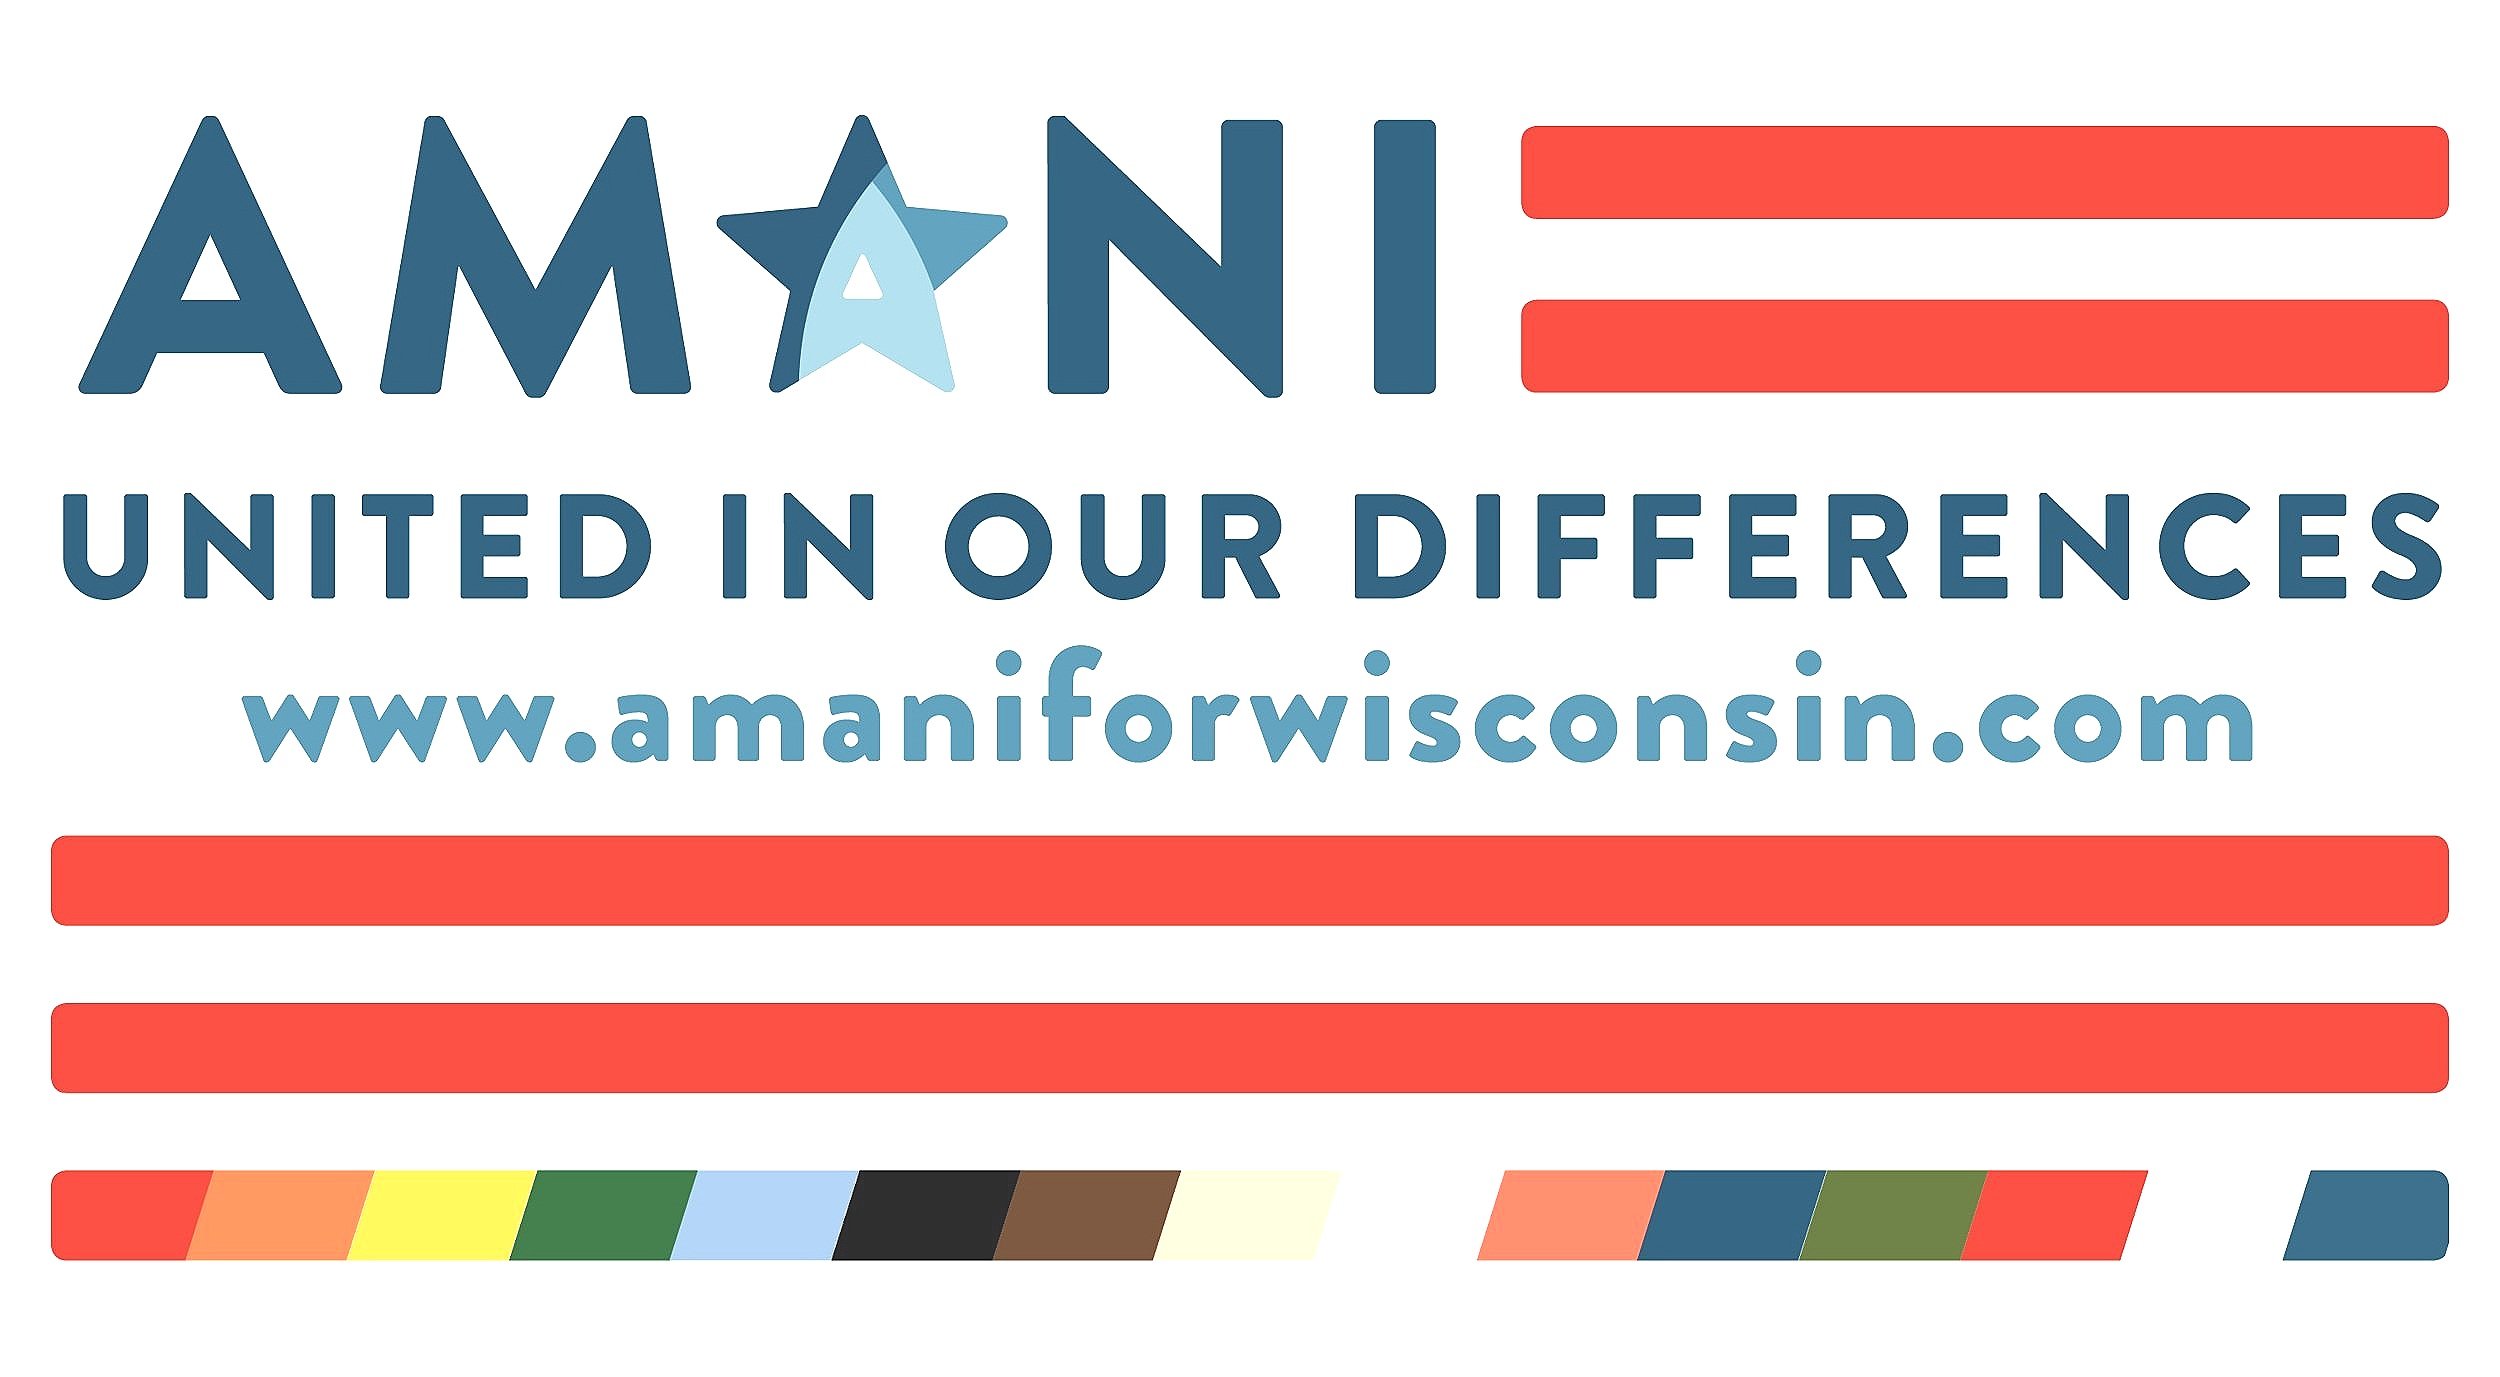 Amani for Wisconsin